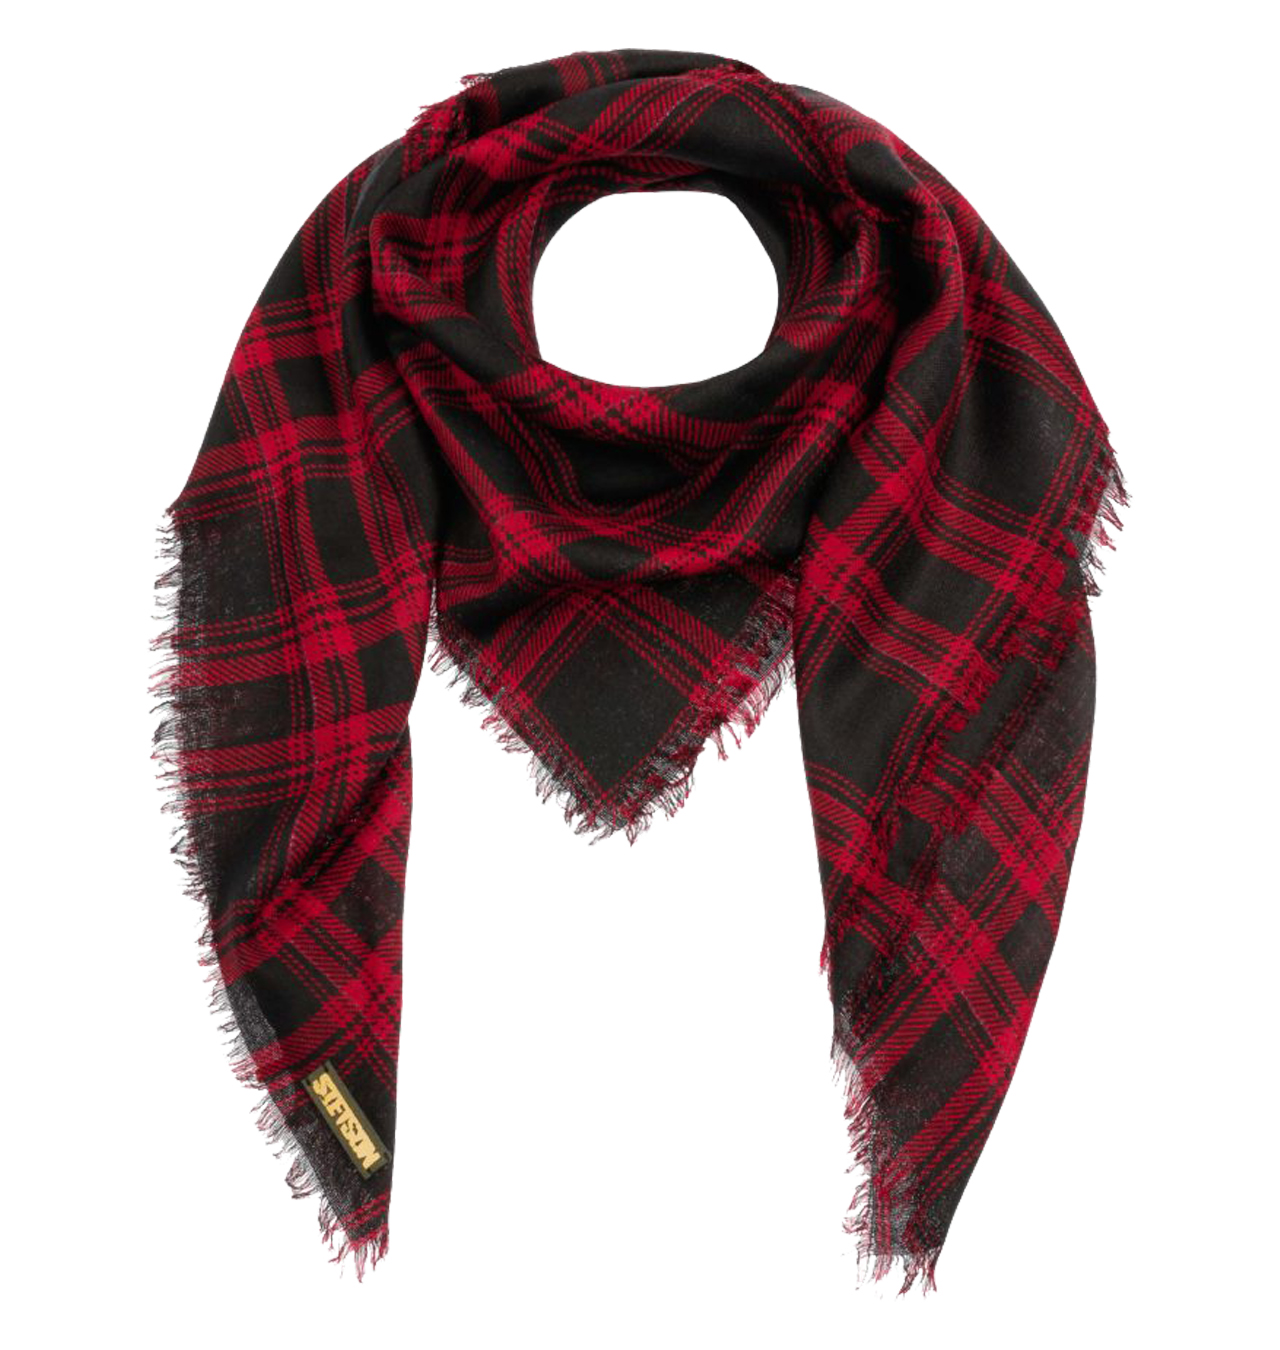 Stetson - Country Check Wool Scarf - Oxblood